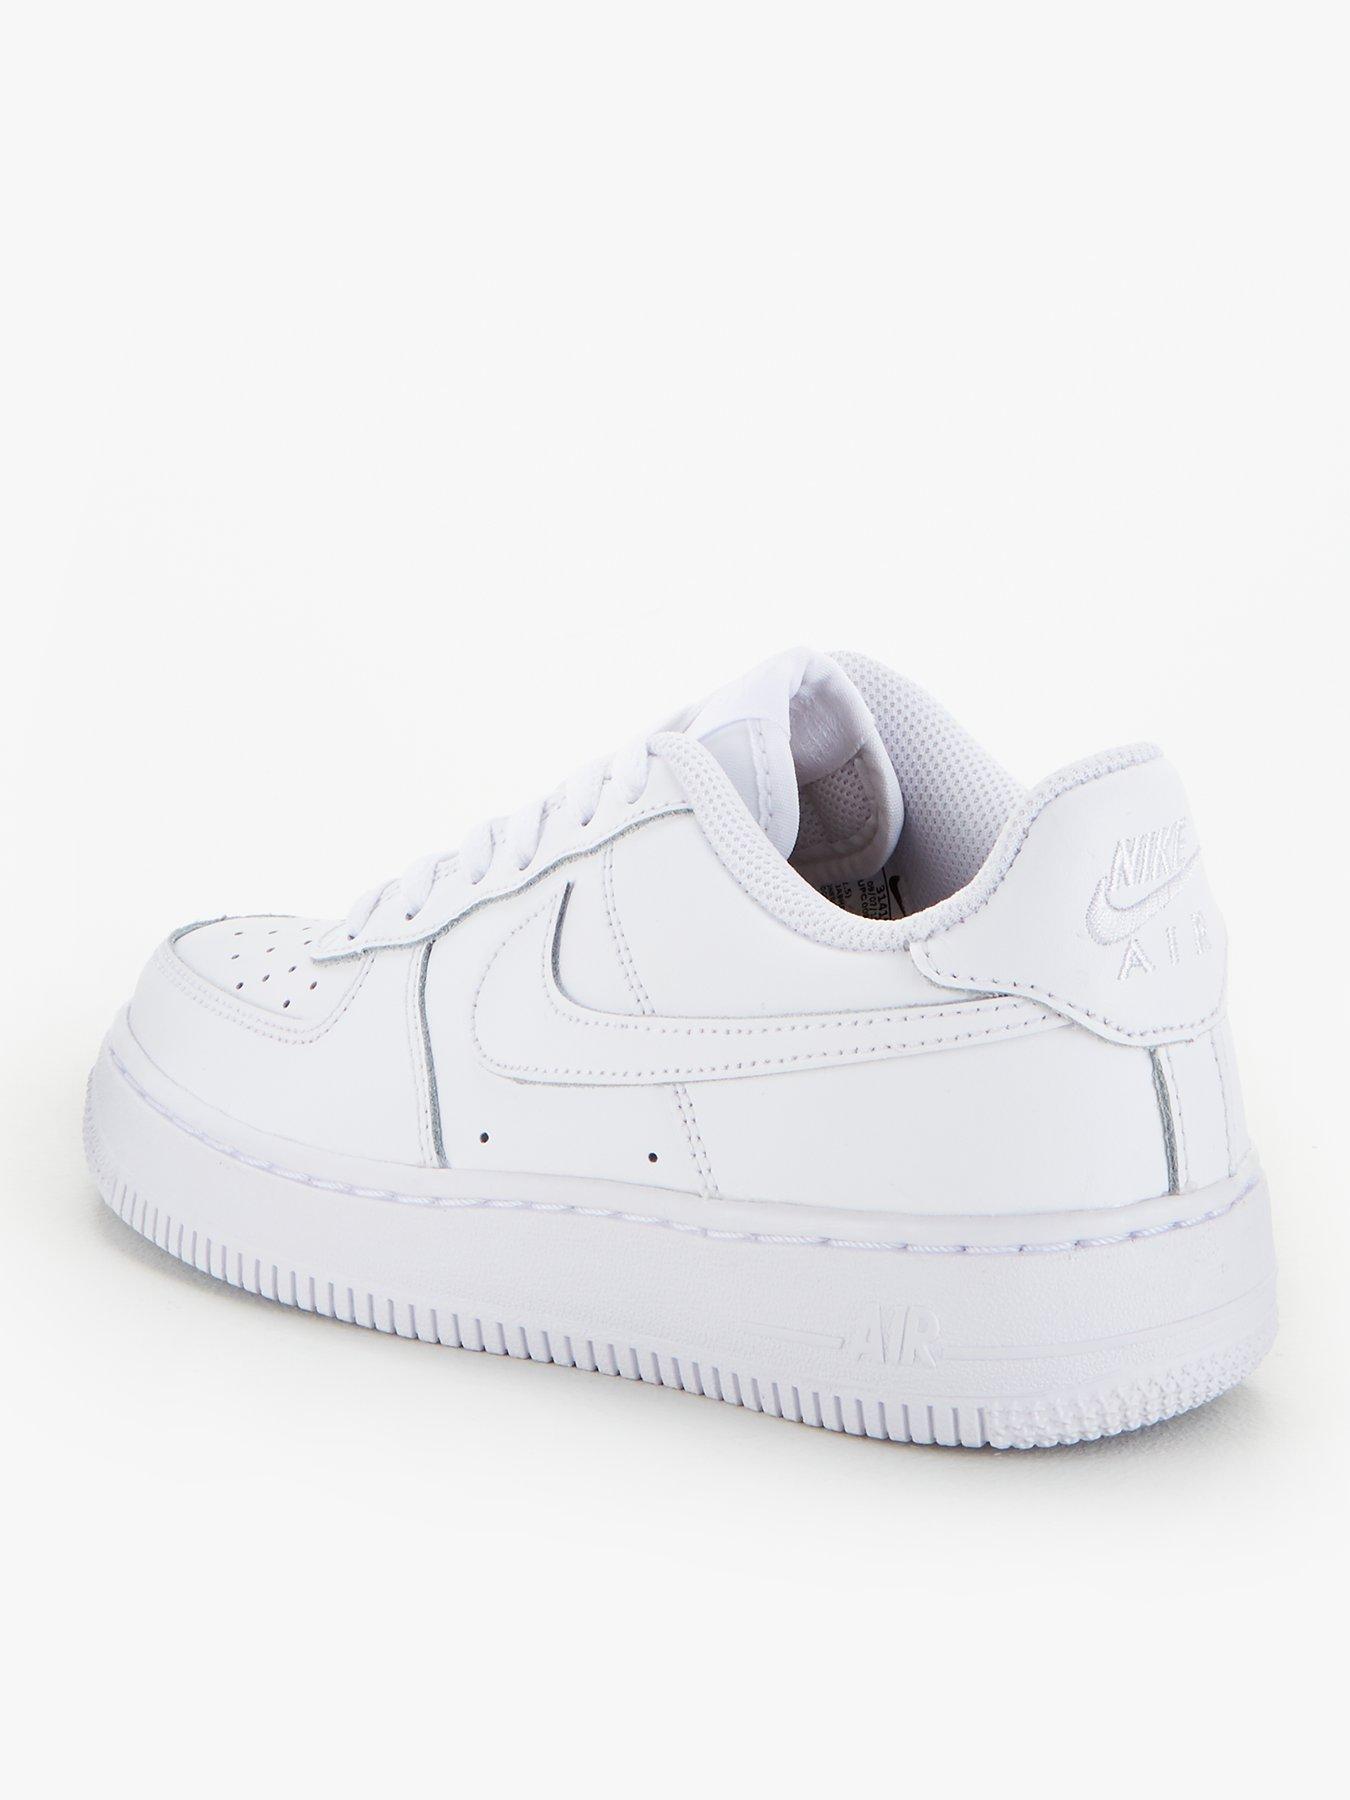 nike air force 1 junior white size 4